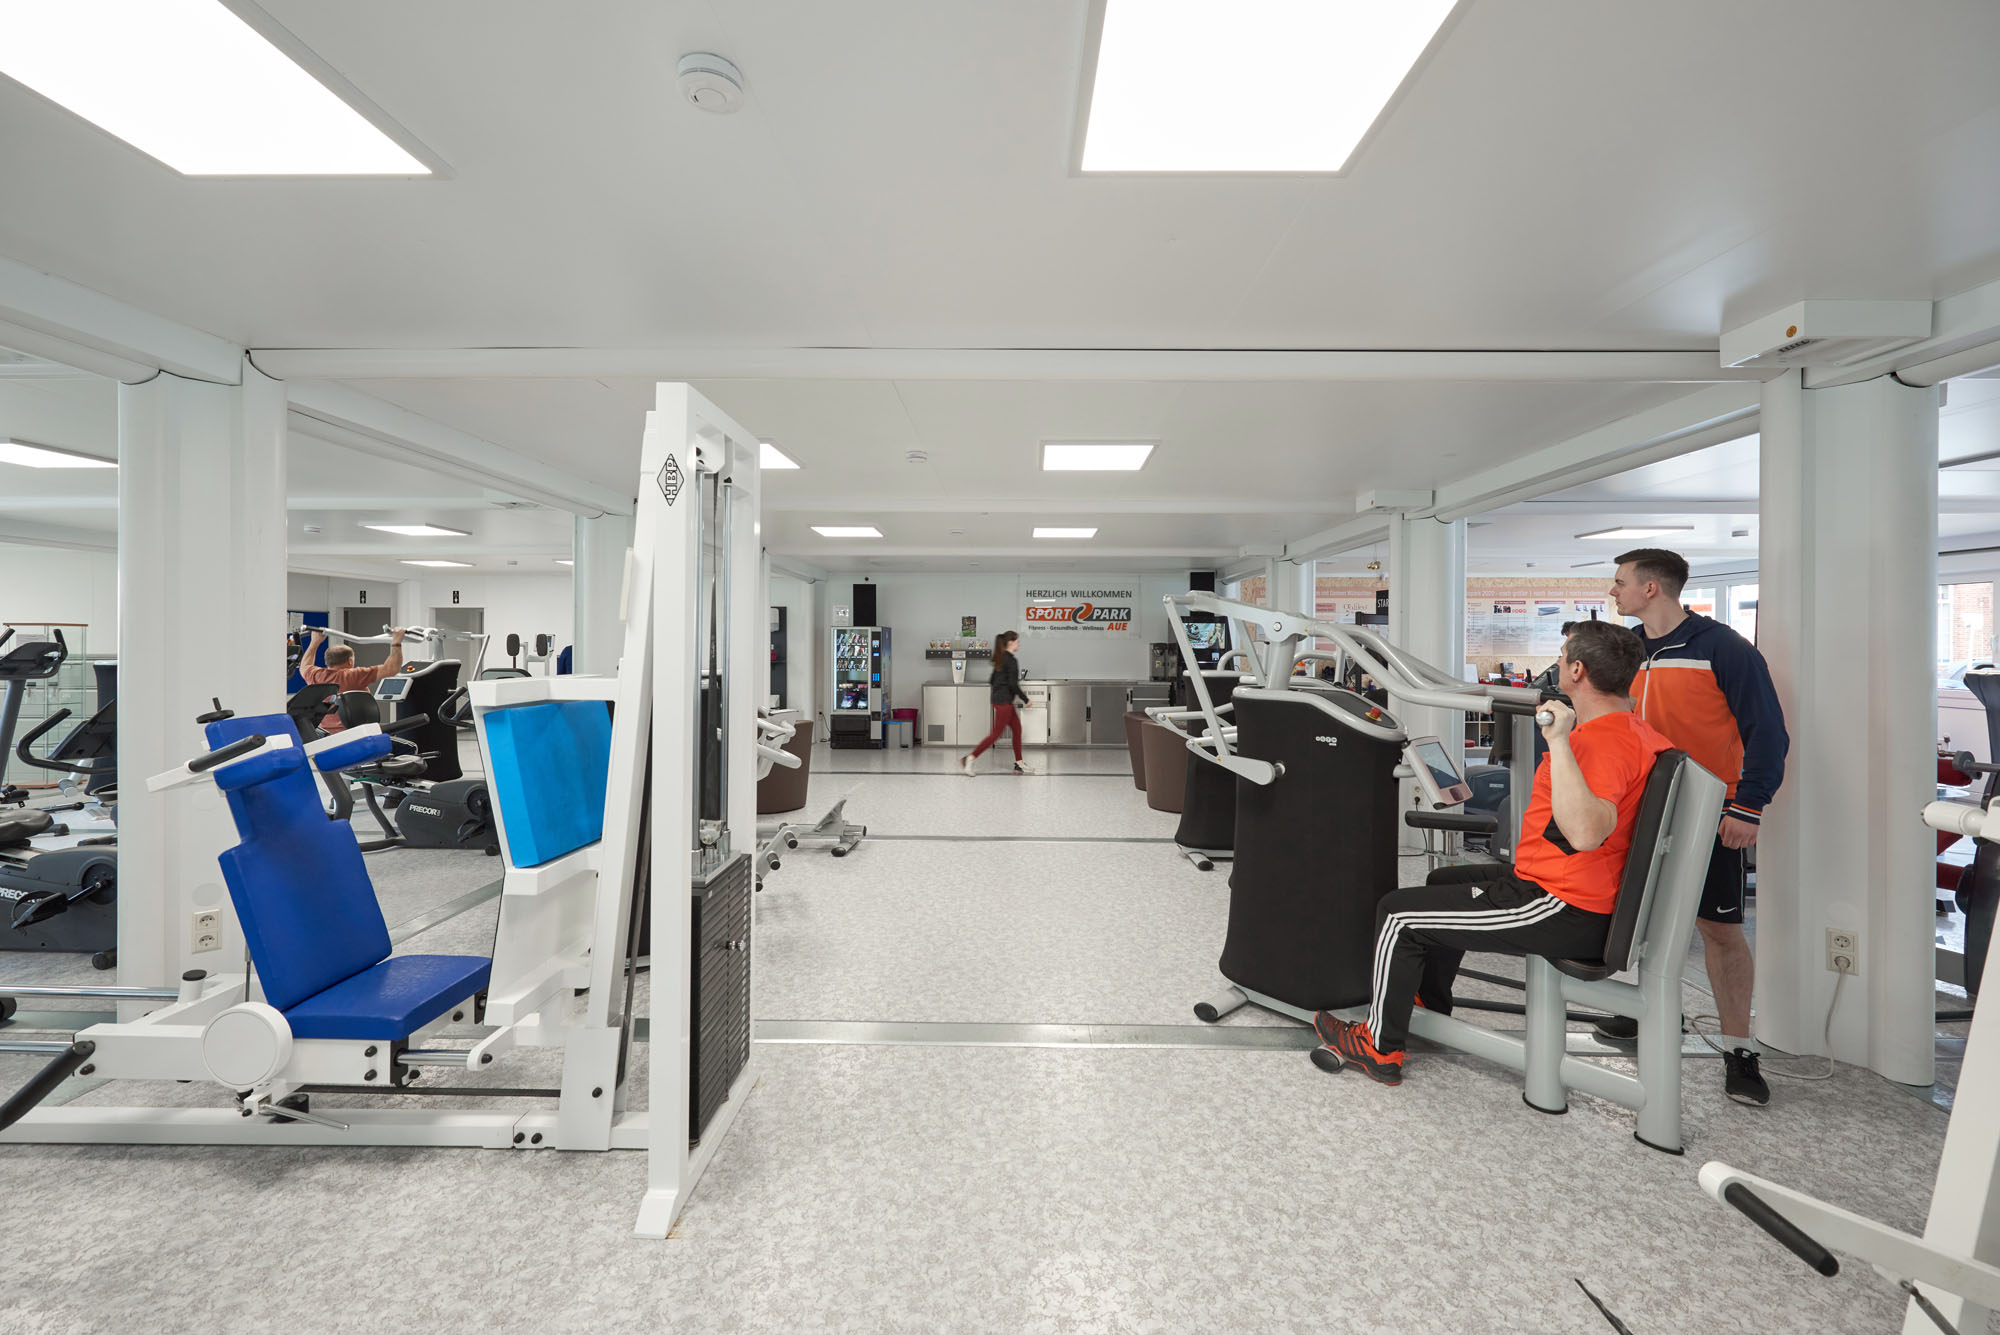 On over 520 square metres, the studio offers everything that a standard fitness studio needs.